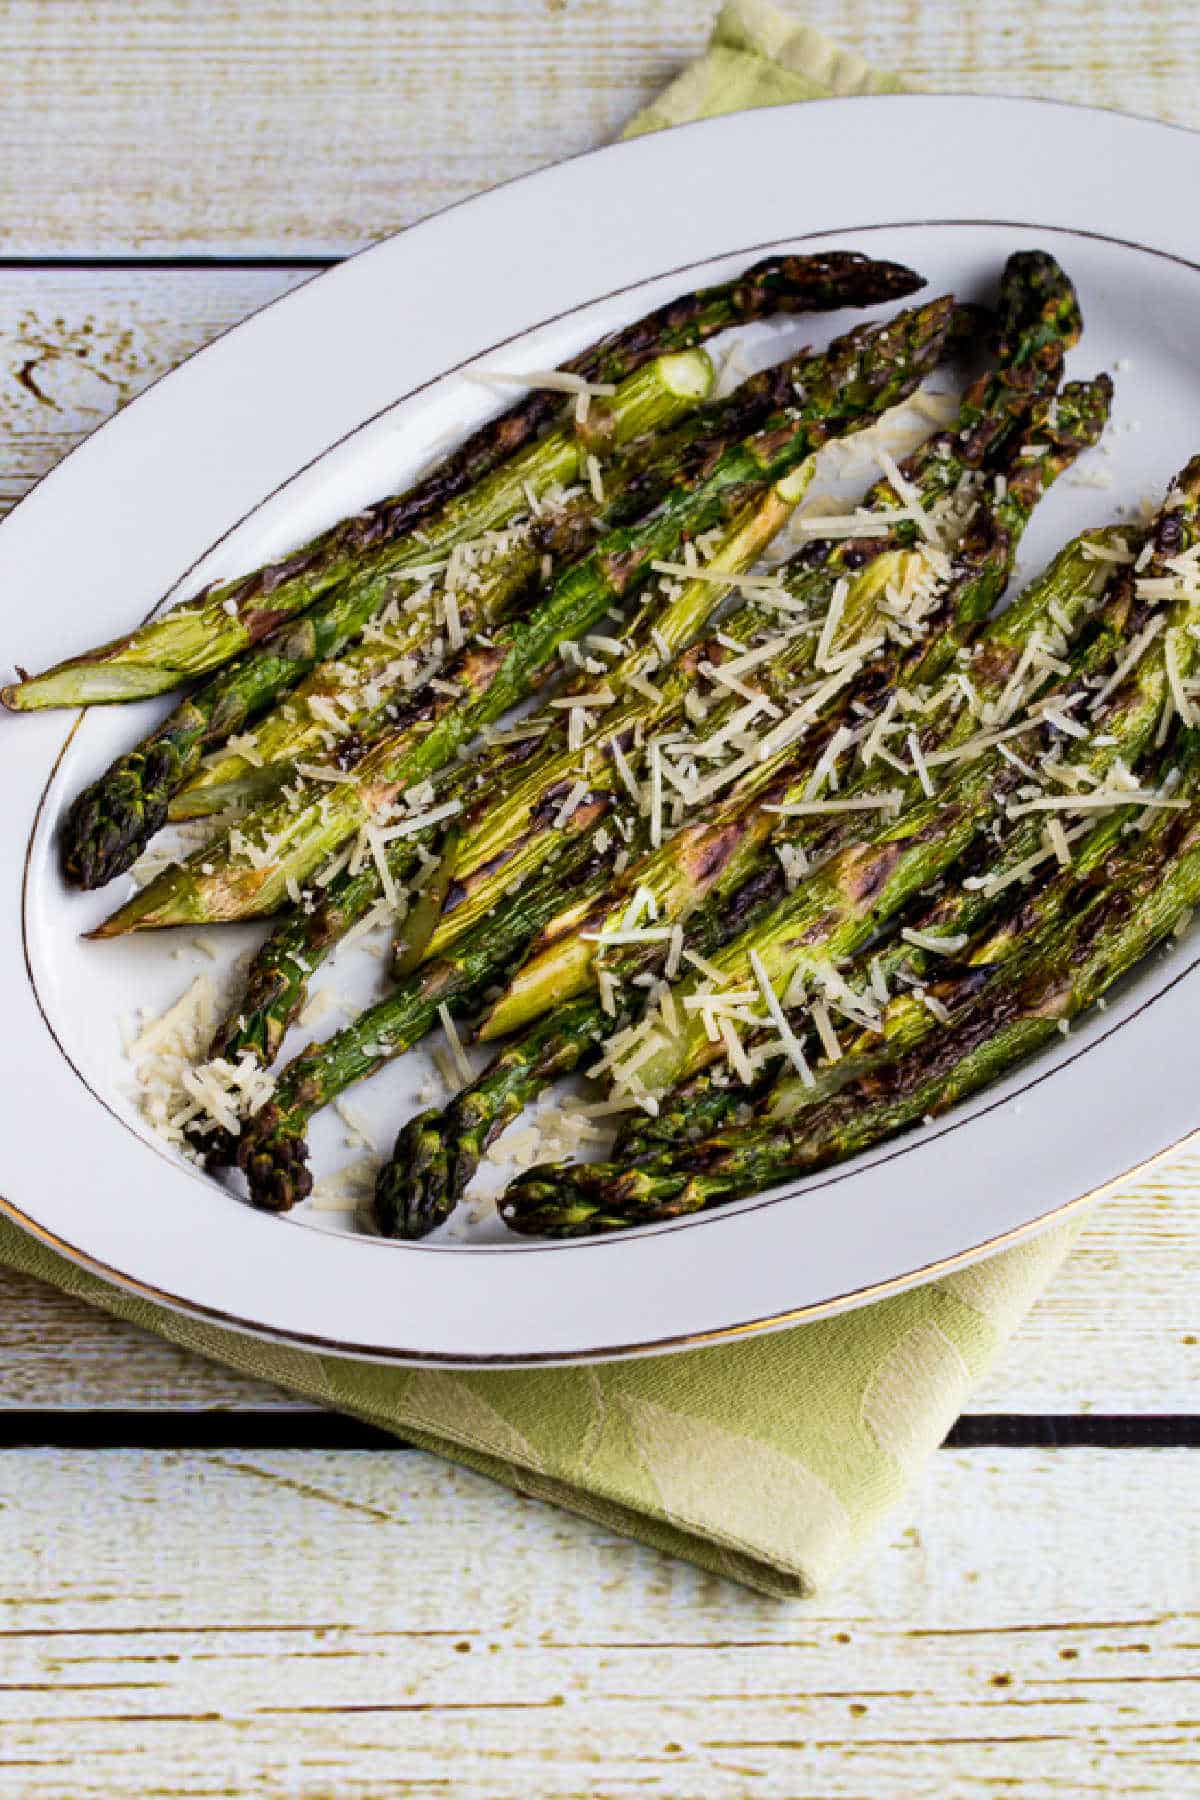 Grilled Asparagus with Parmesan shown on serving dish placed on napkin